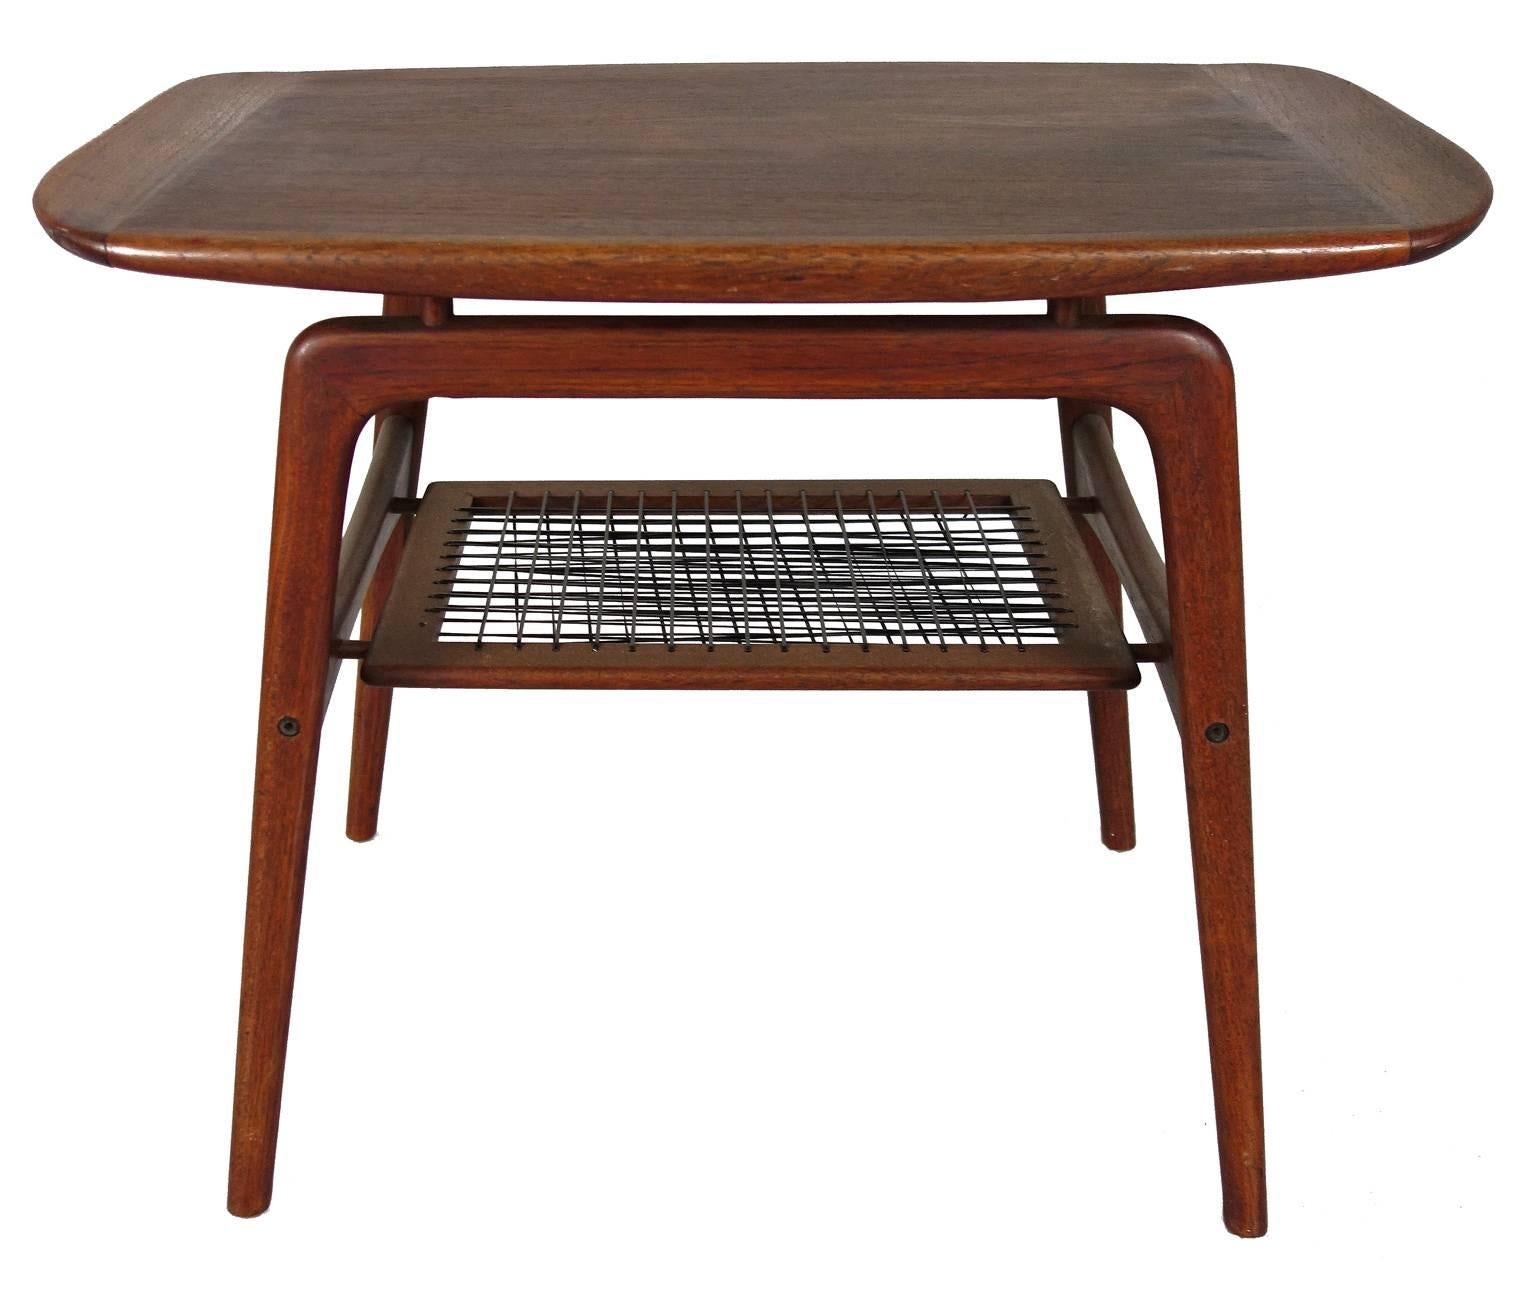 Danish teak side or end table by Arne Hovmand Olsen by Mogens Kold. Original unrestored condition with a lovely patina.